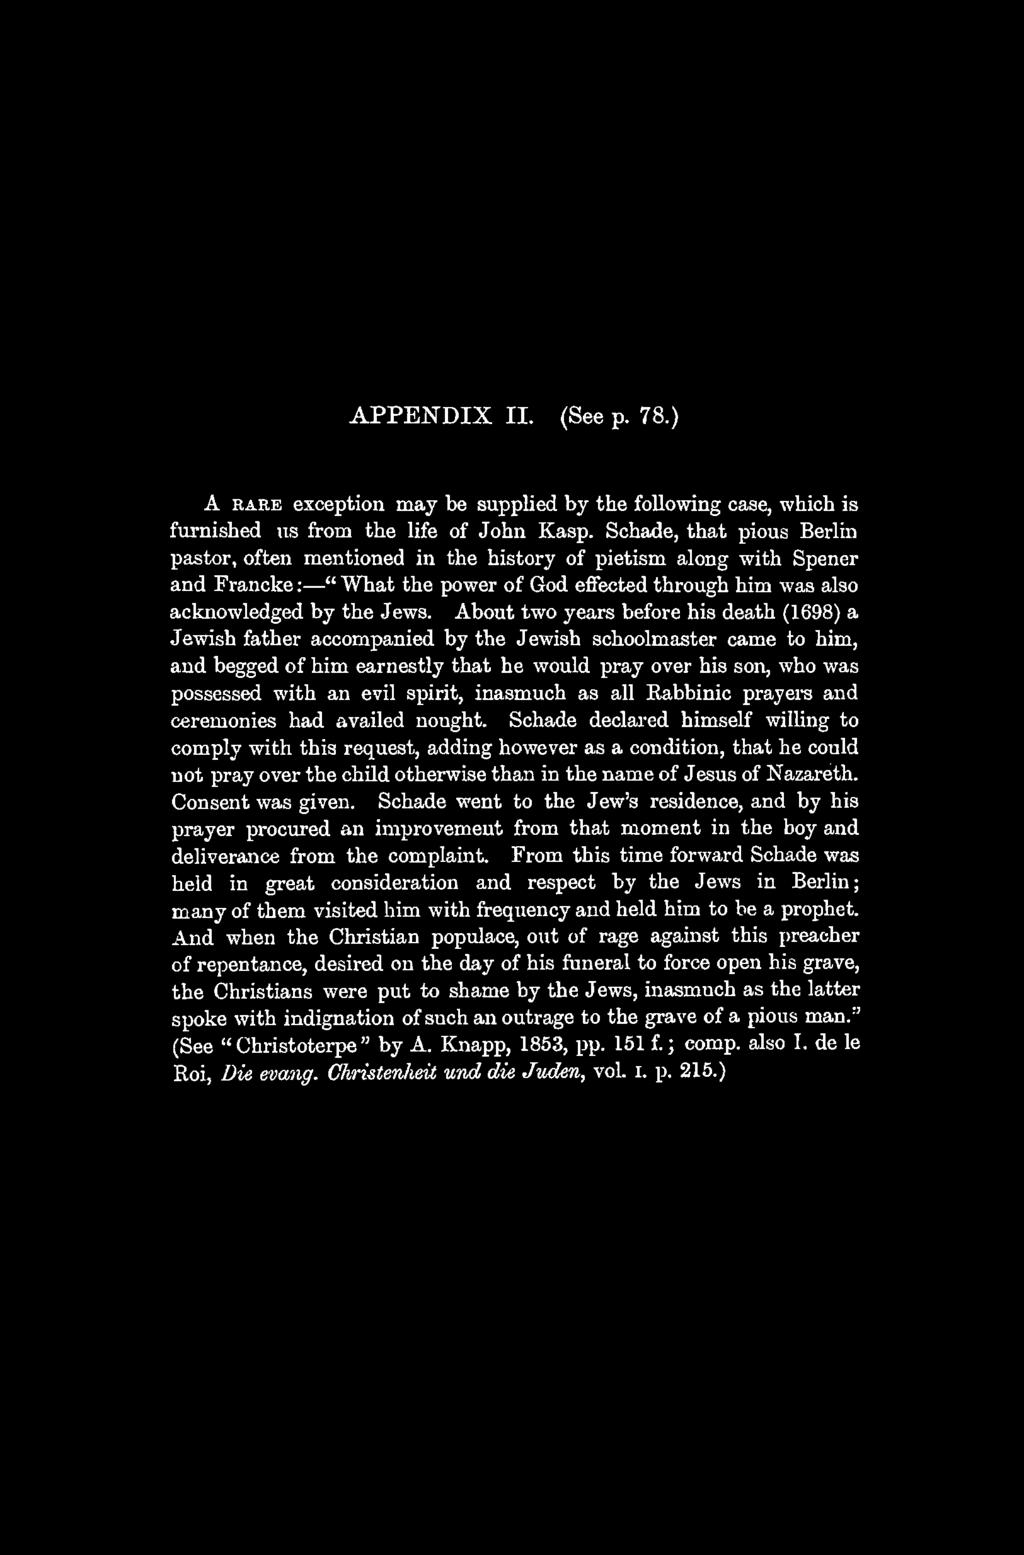 APPENDIX II. (See p. 78.) A RARE exception may be supplied by the following case, which is furnished us from the life of John Kasp.